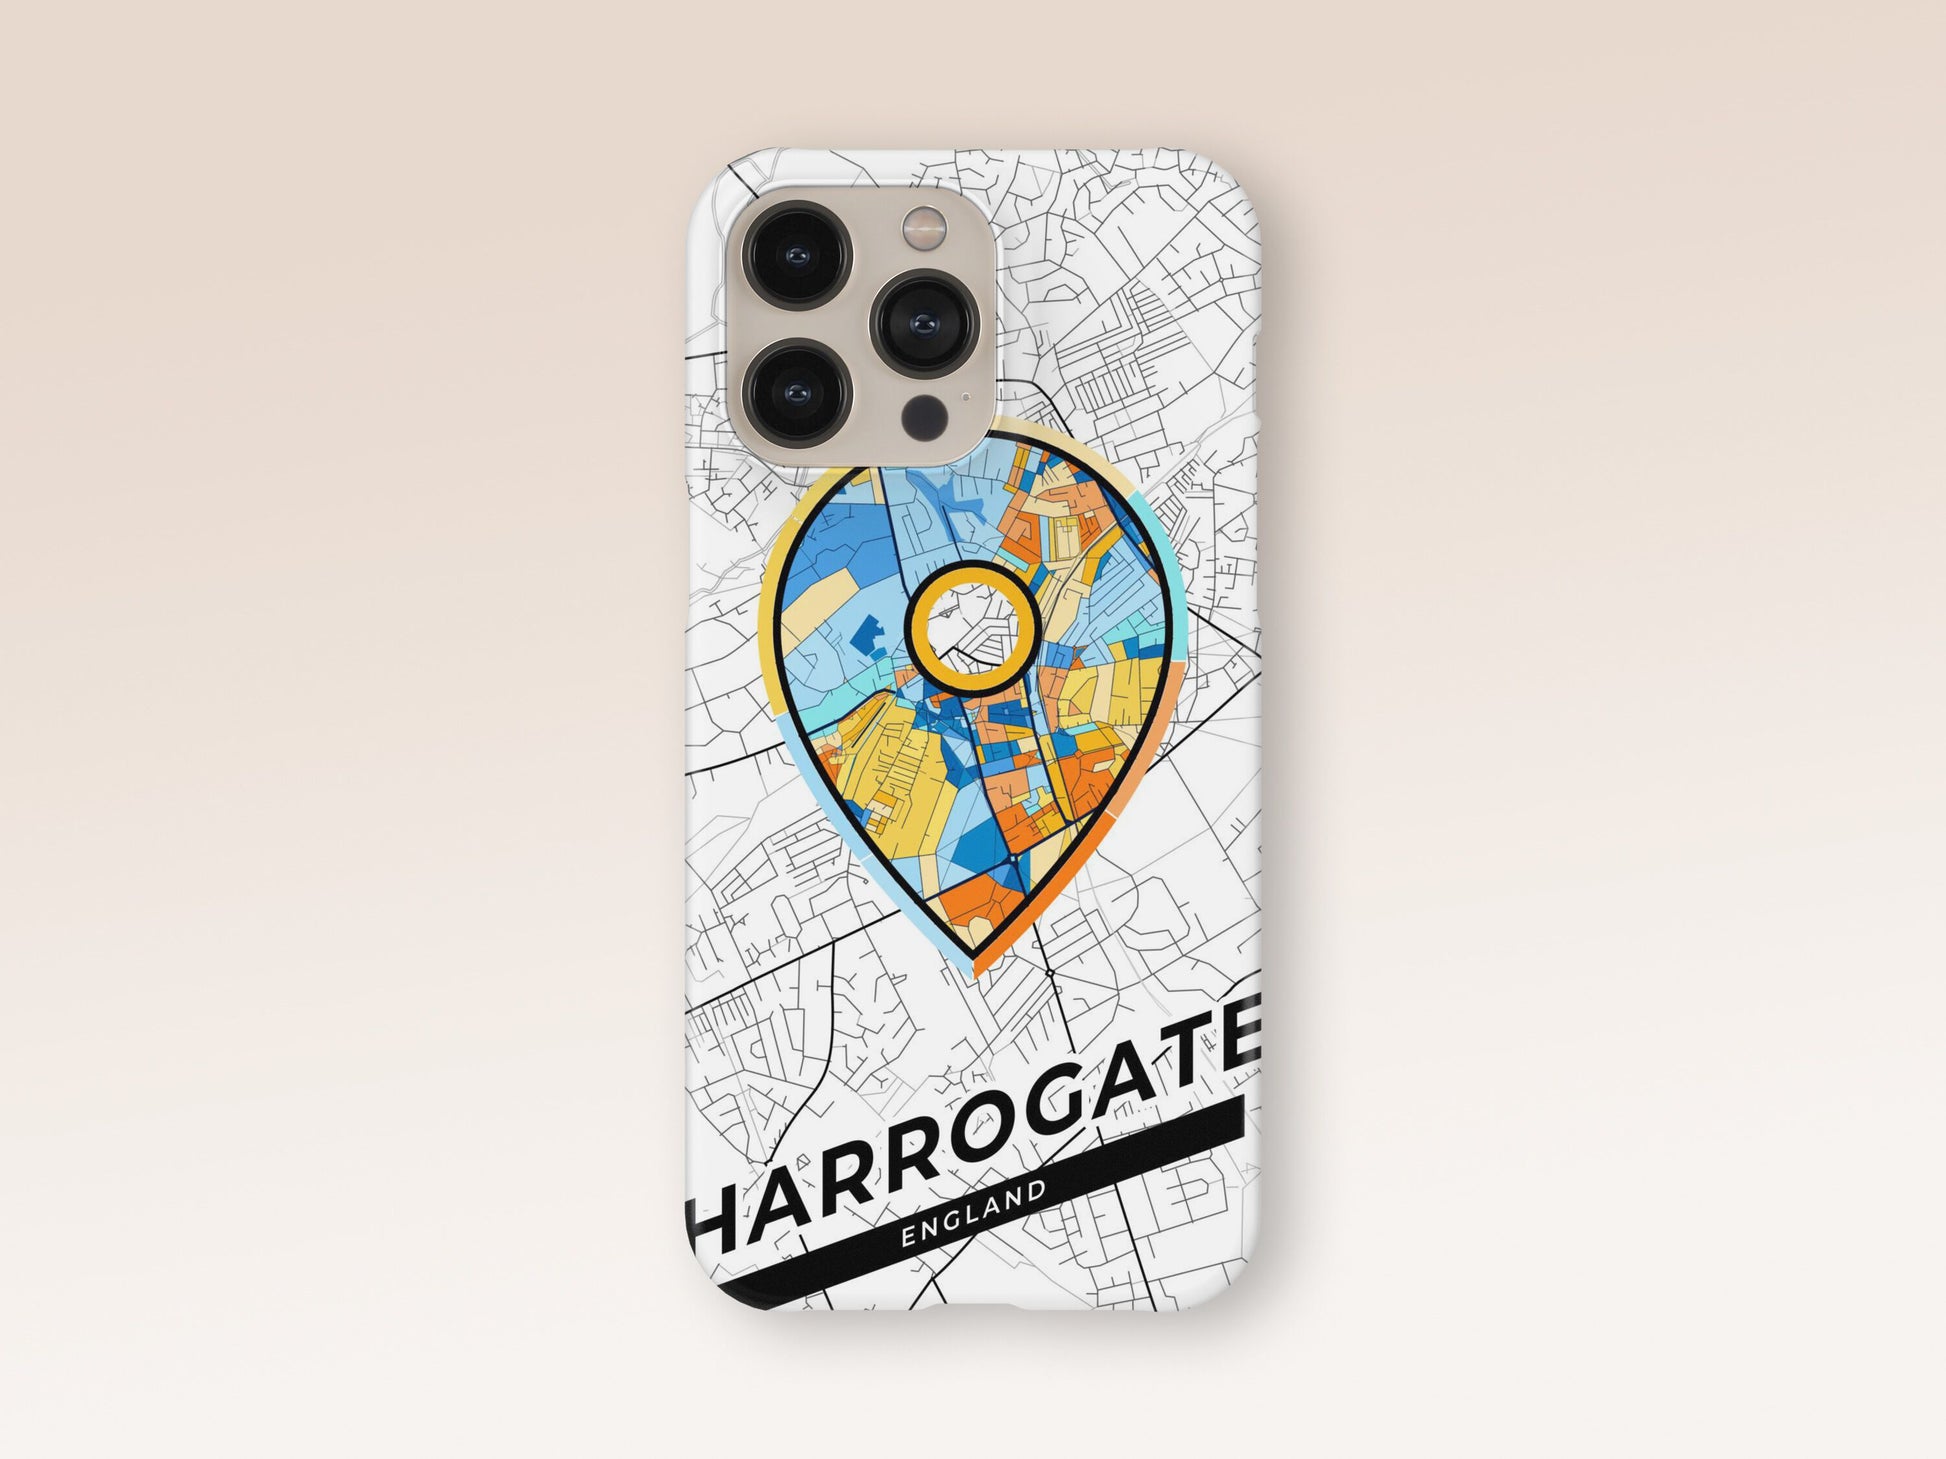 Harrogate England slim phone case with colorful icon. Birthday, wedding or housewarming gift. Couple match cases. 1